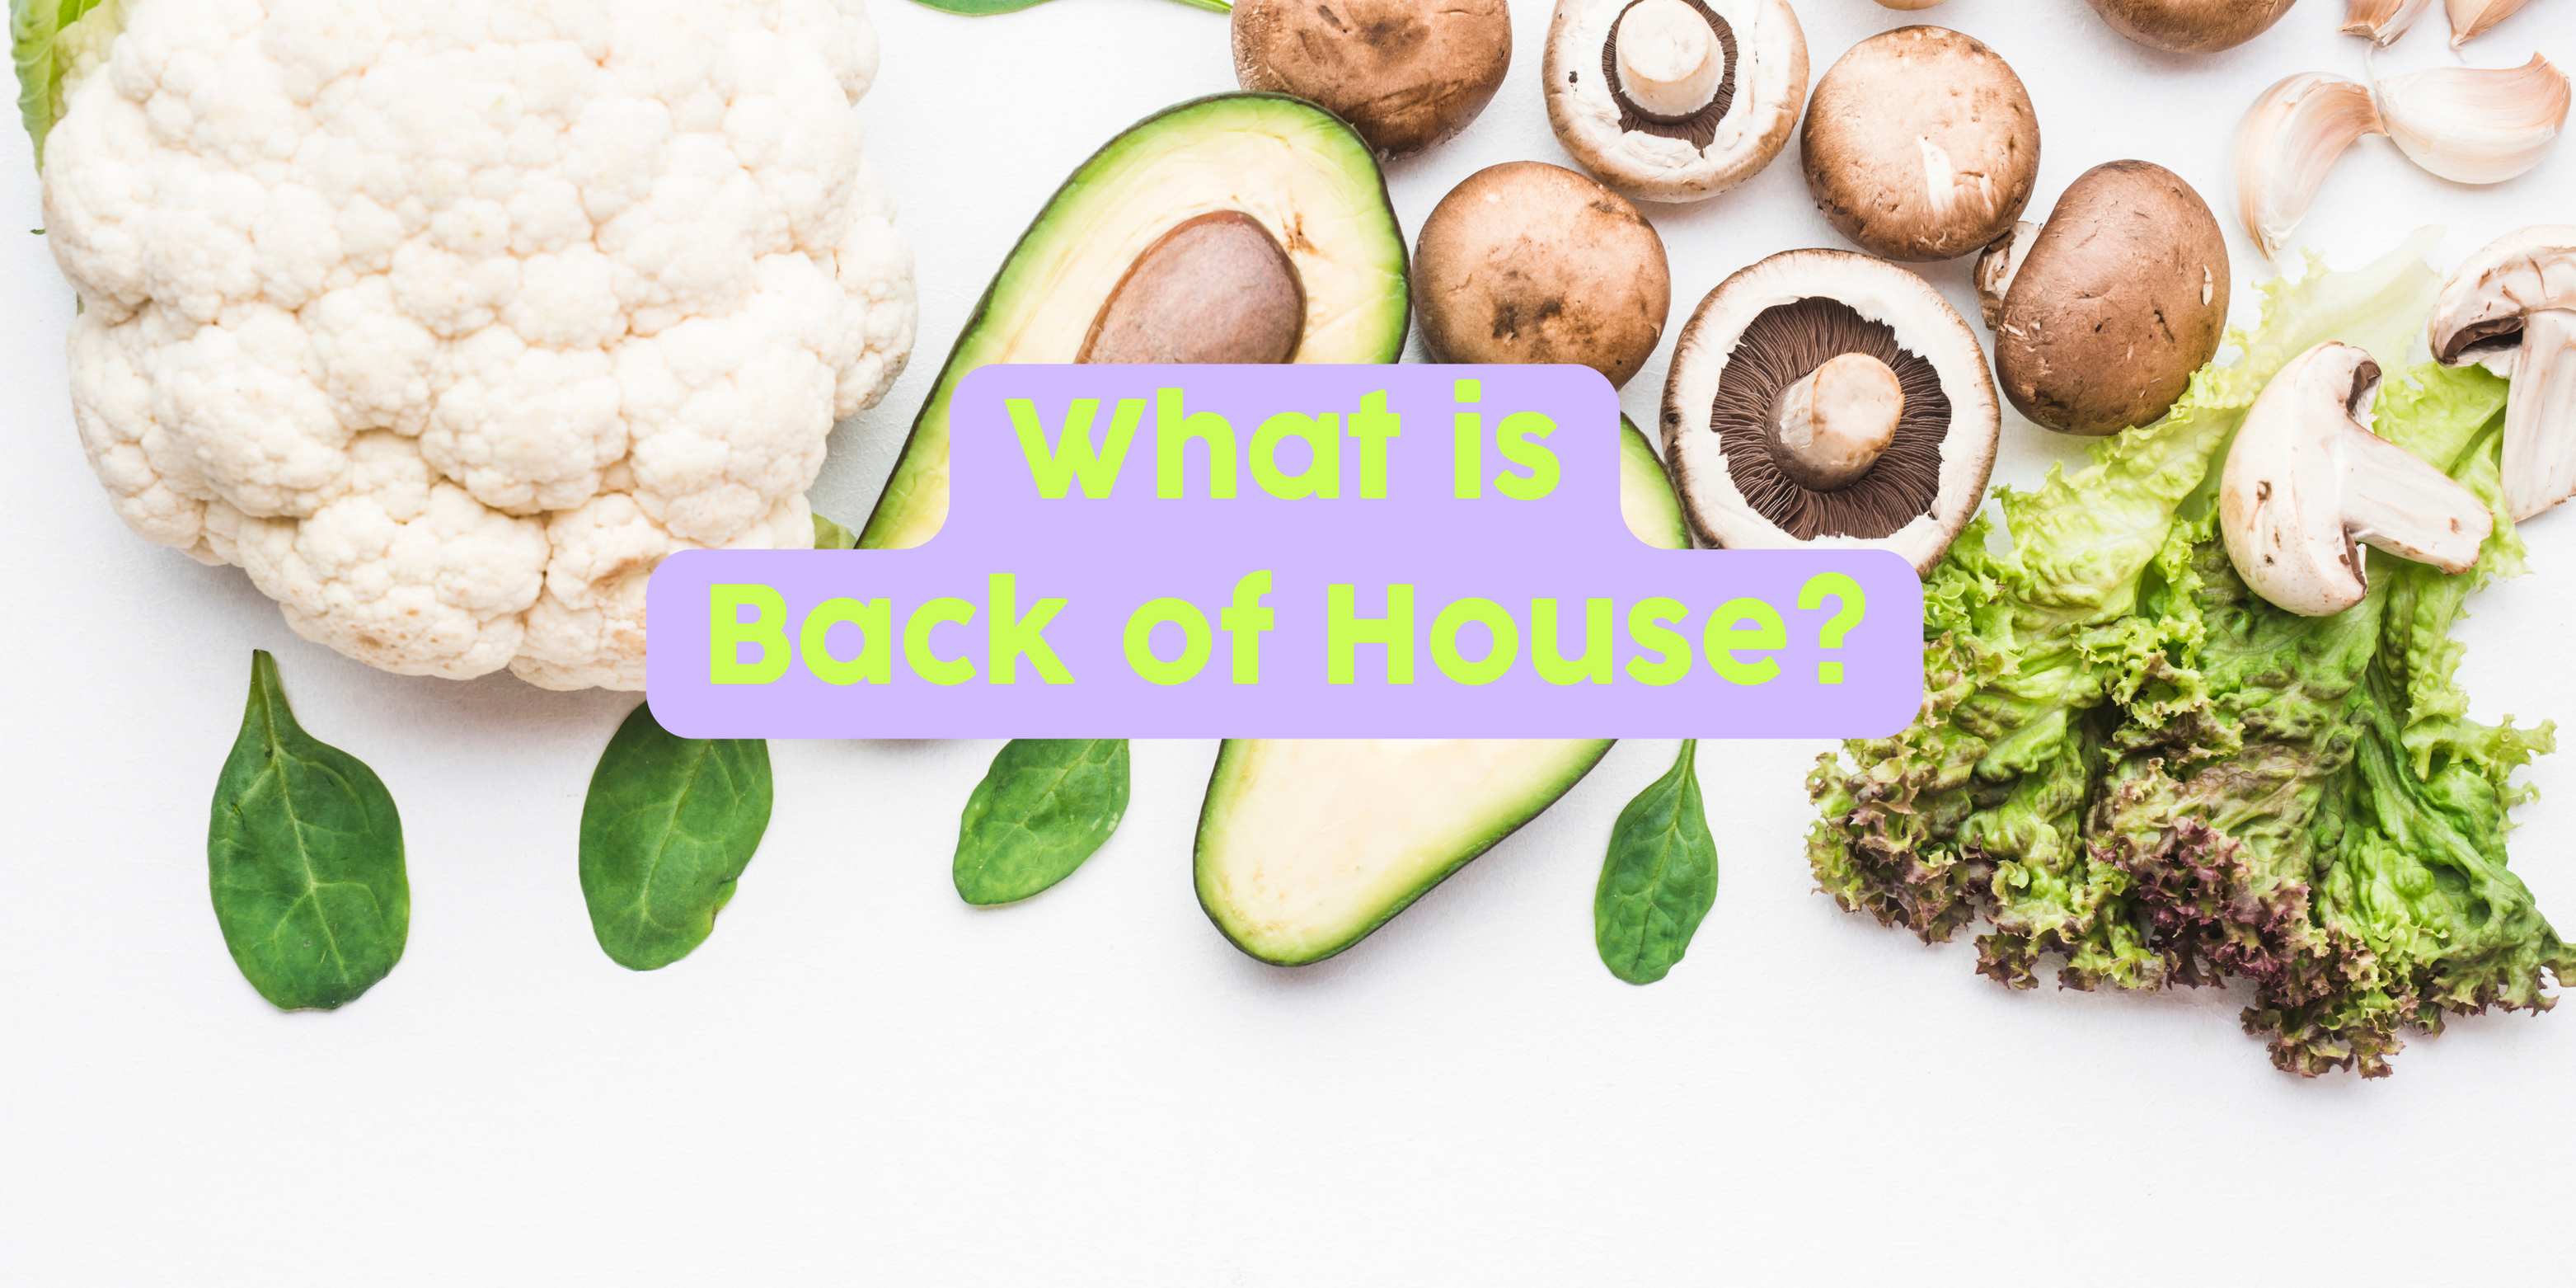 What is Back of House?